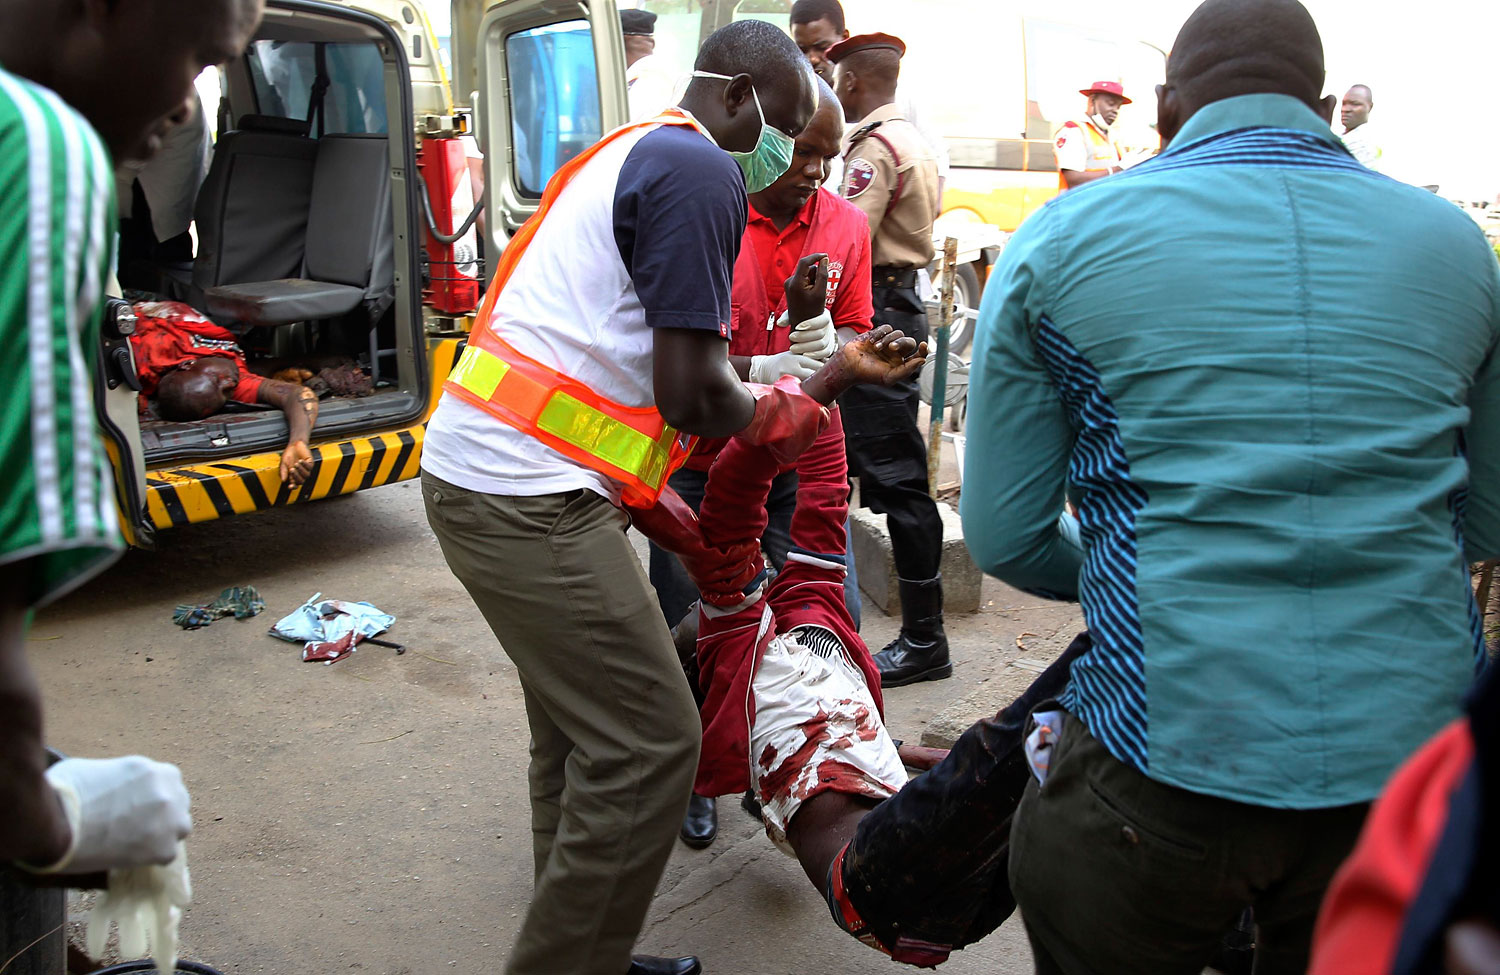 A Red Cross worker and other volunteers help move a body into the mortuary of the Asokoro General Hospital after a bomb blast, in Abuja, April 14, 2014.